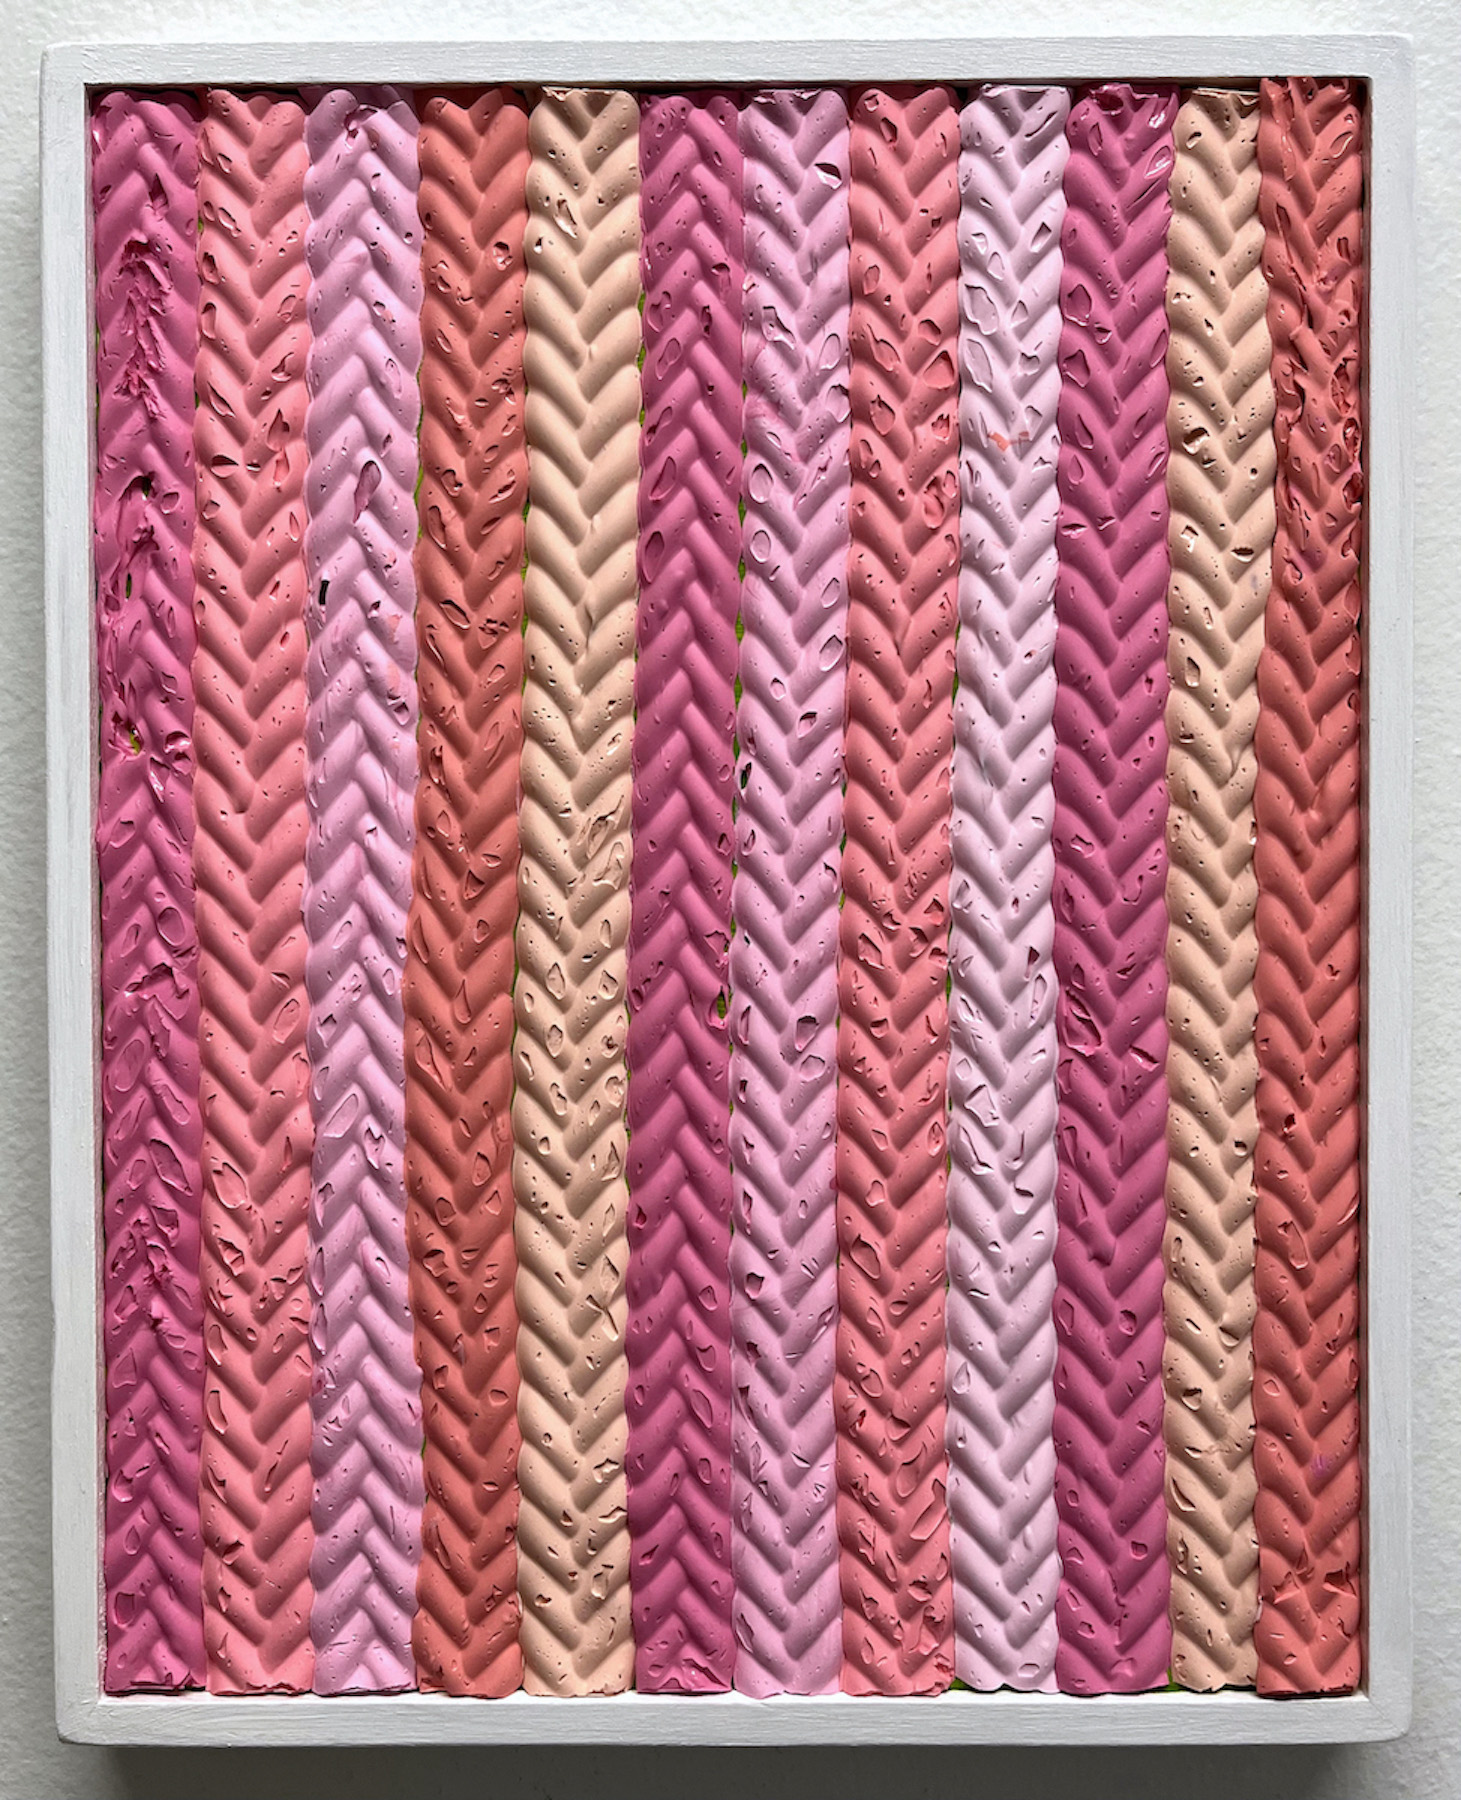 acrylic painting in pinks and browns of a close up of knitted fabric